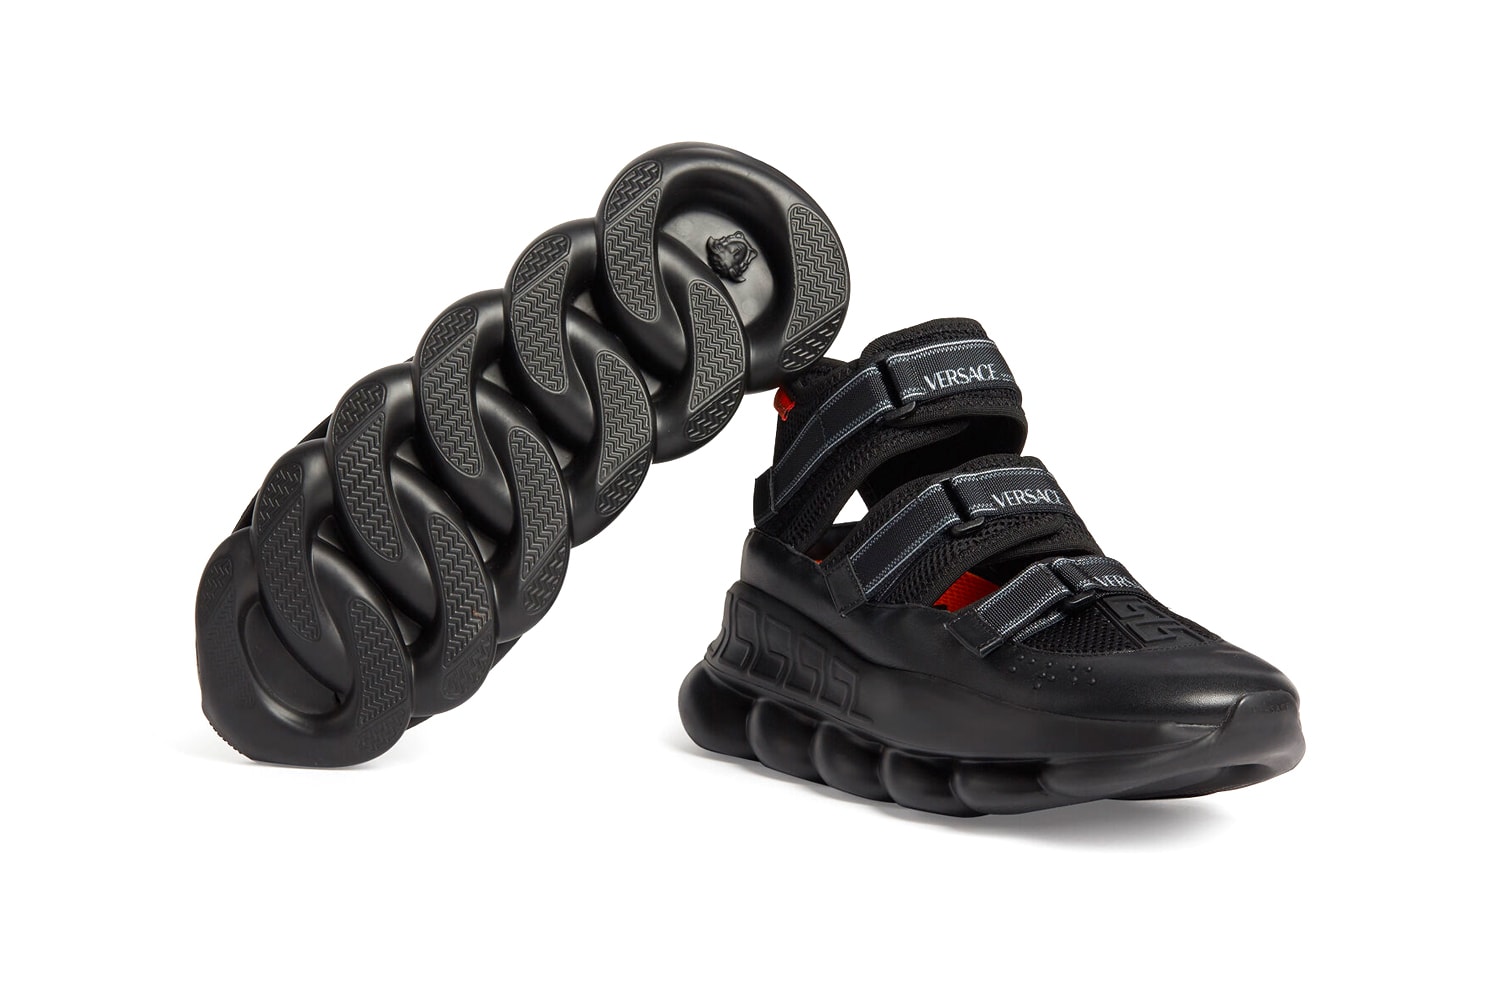 Versace Chain Reaction Sandals Release Info drop date price Chain-linked sole Greca outsole Braille lettering Logo hook and loop straps made in italy DSU8006-D24TG_D41 where to cop 